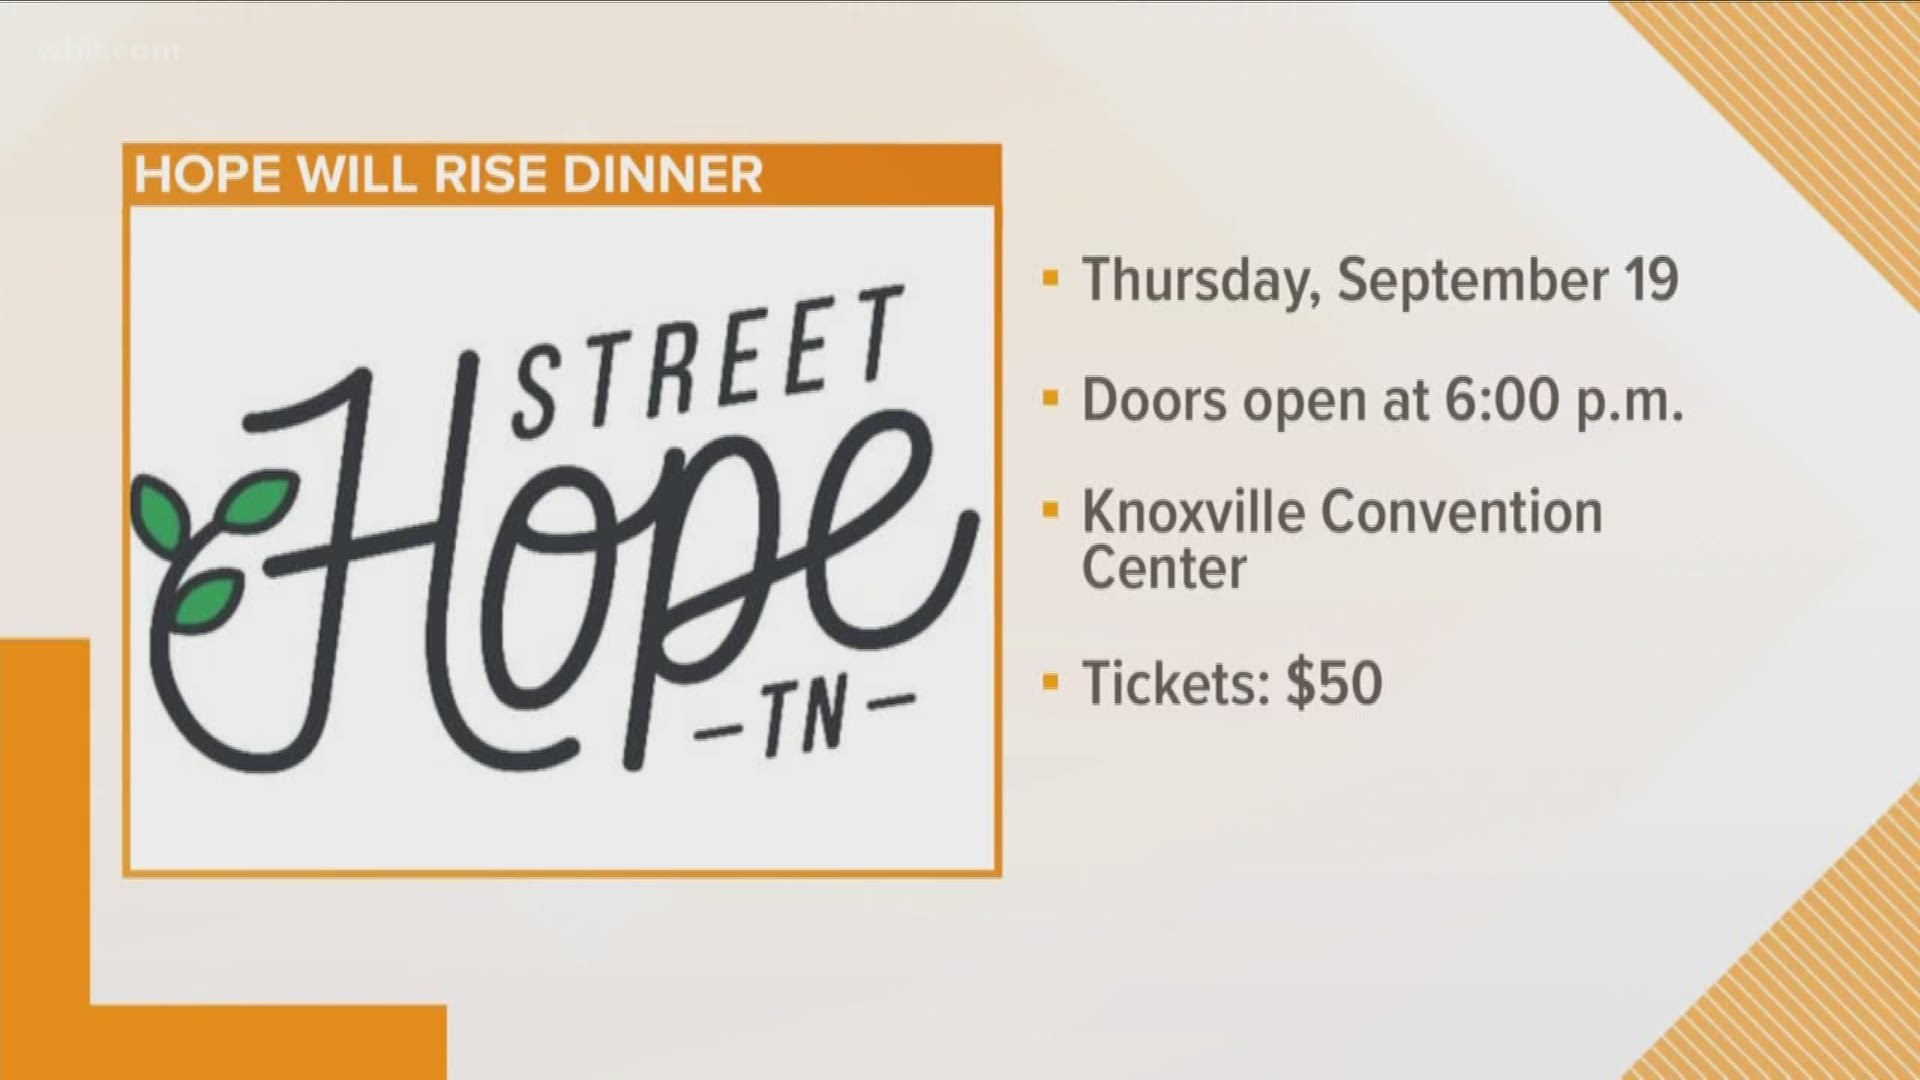 Street Hope TN is a nonprofit organization in Knoxville fighting against child sexual exploitation and trafficking. The group talks about an upcoming event, the Hope Will Rise dinner, to support its efforts.